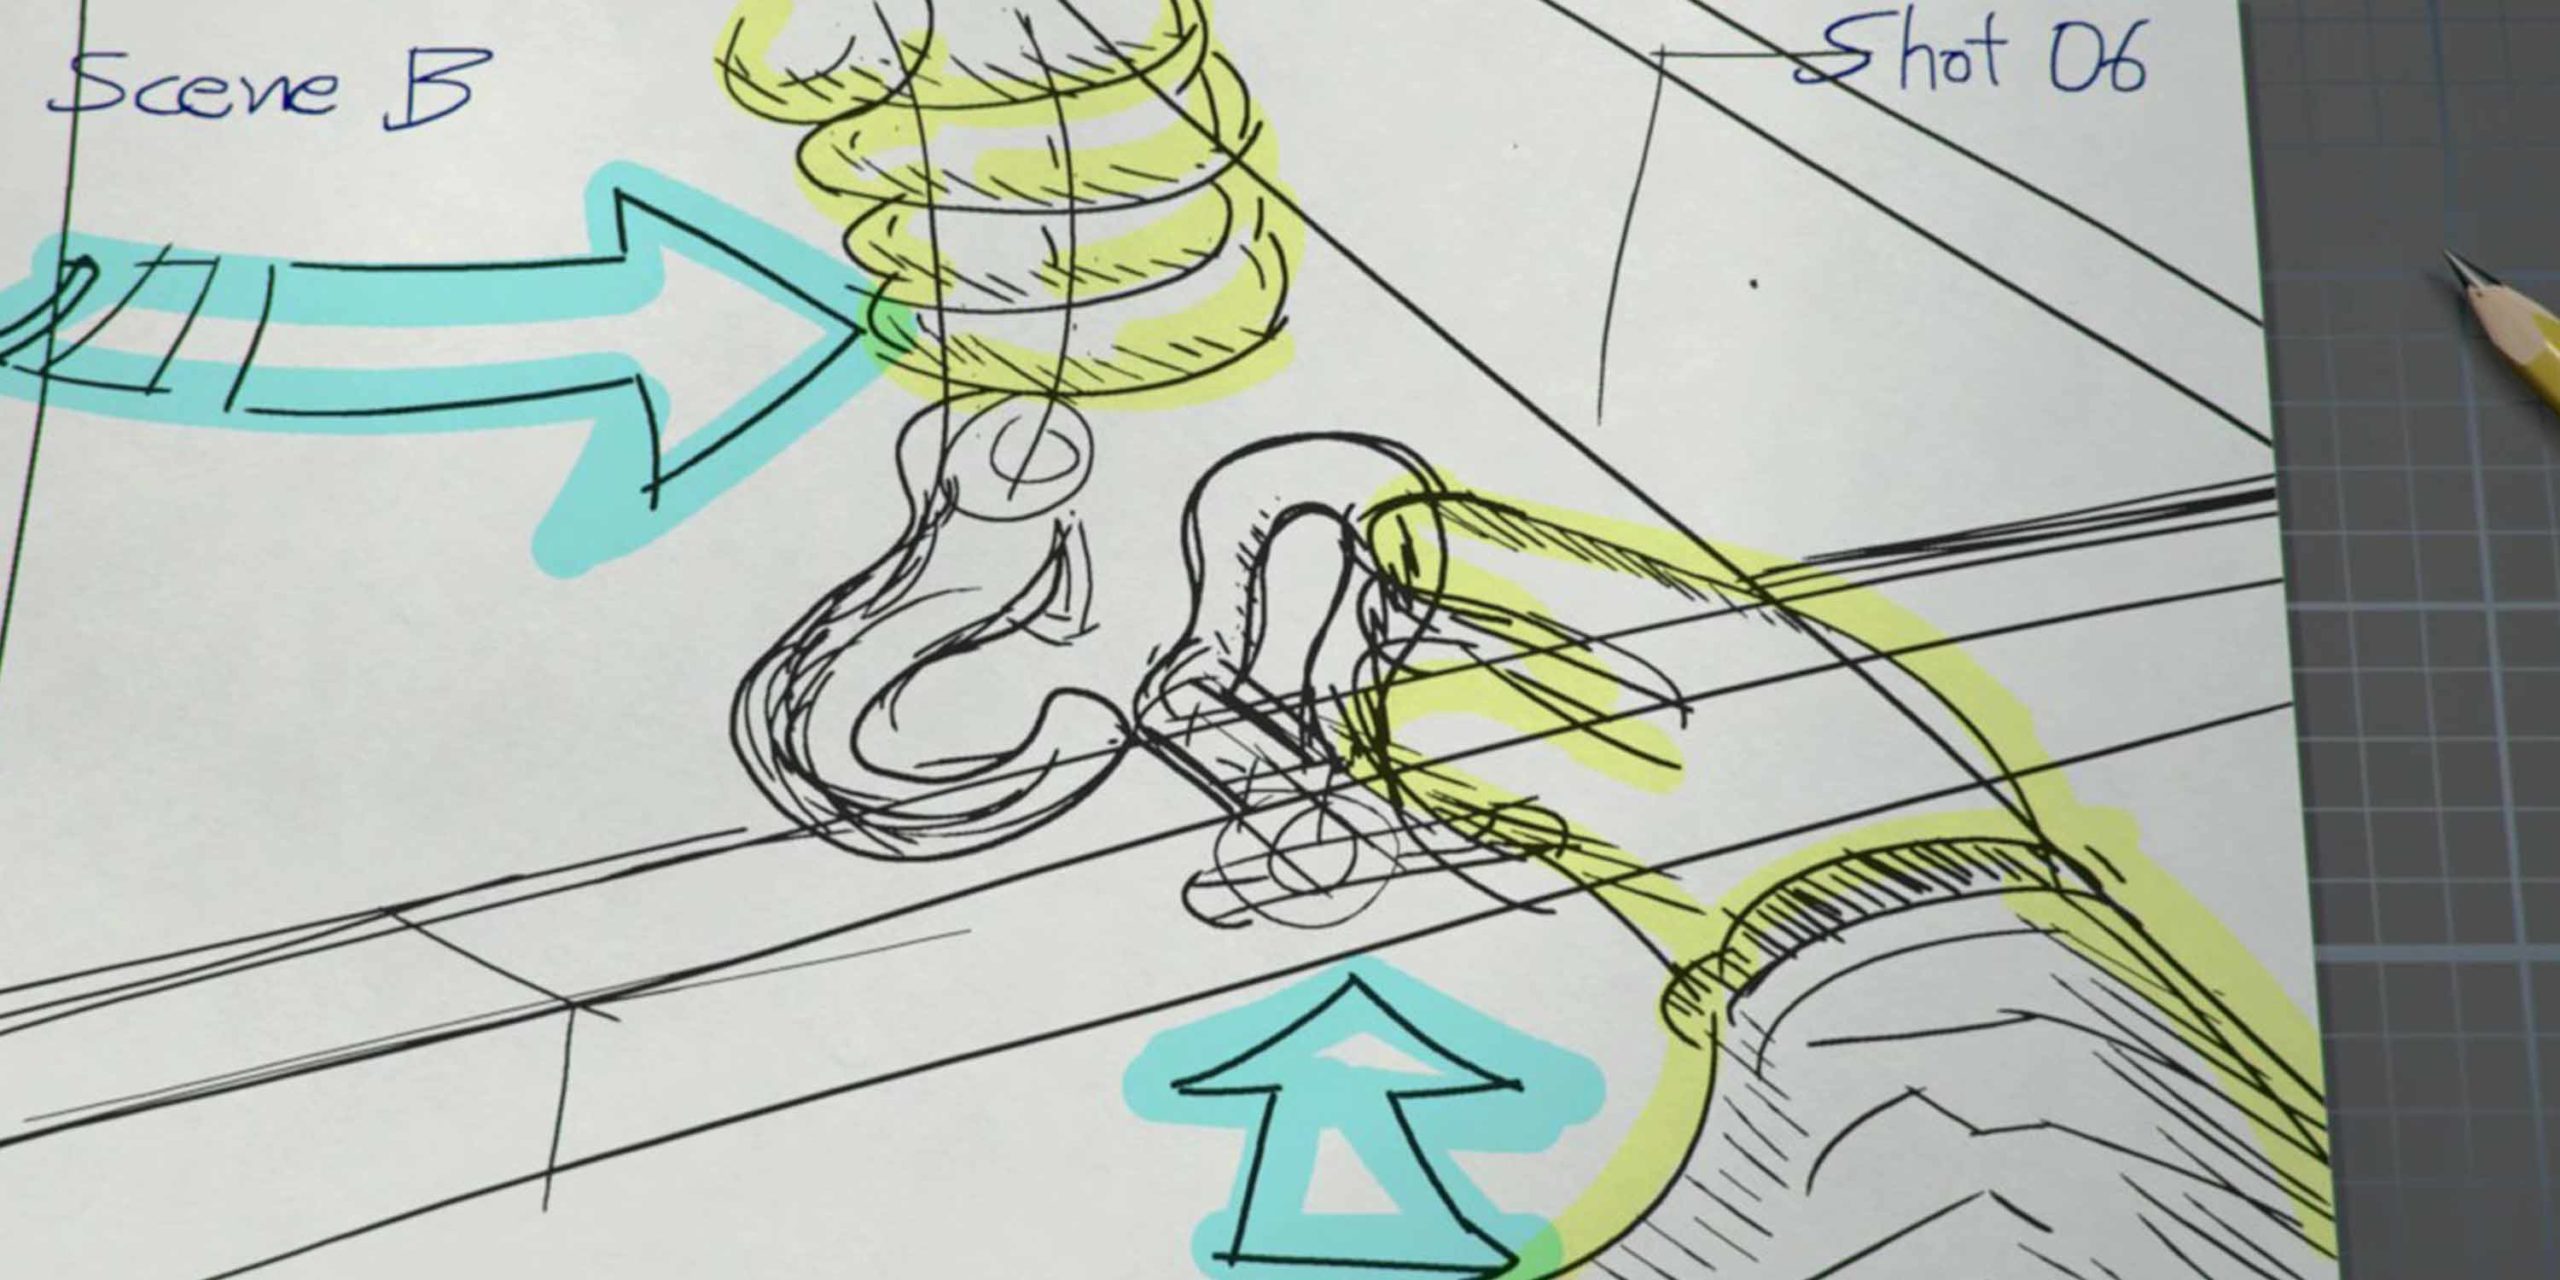 Storyboarding Complex Construction Concepts header image #2